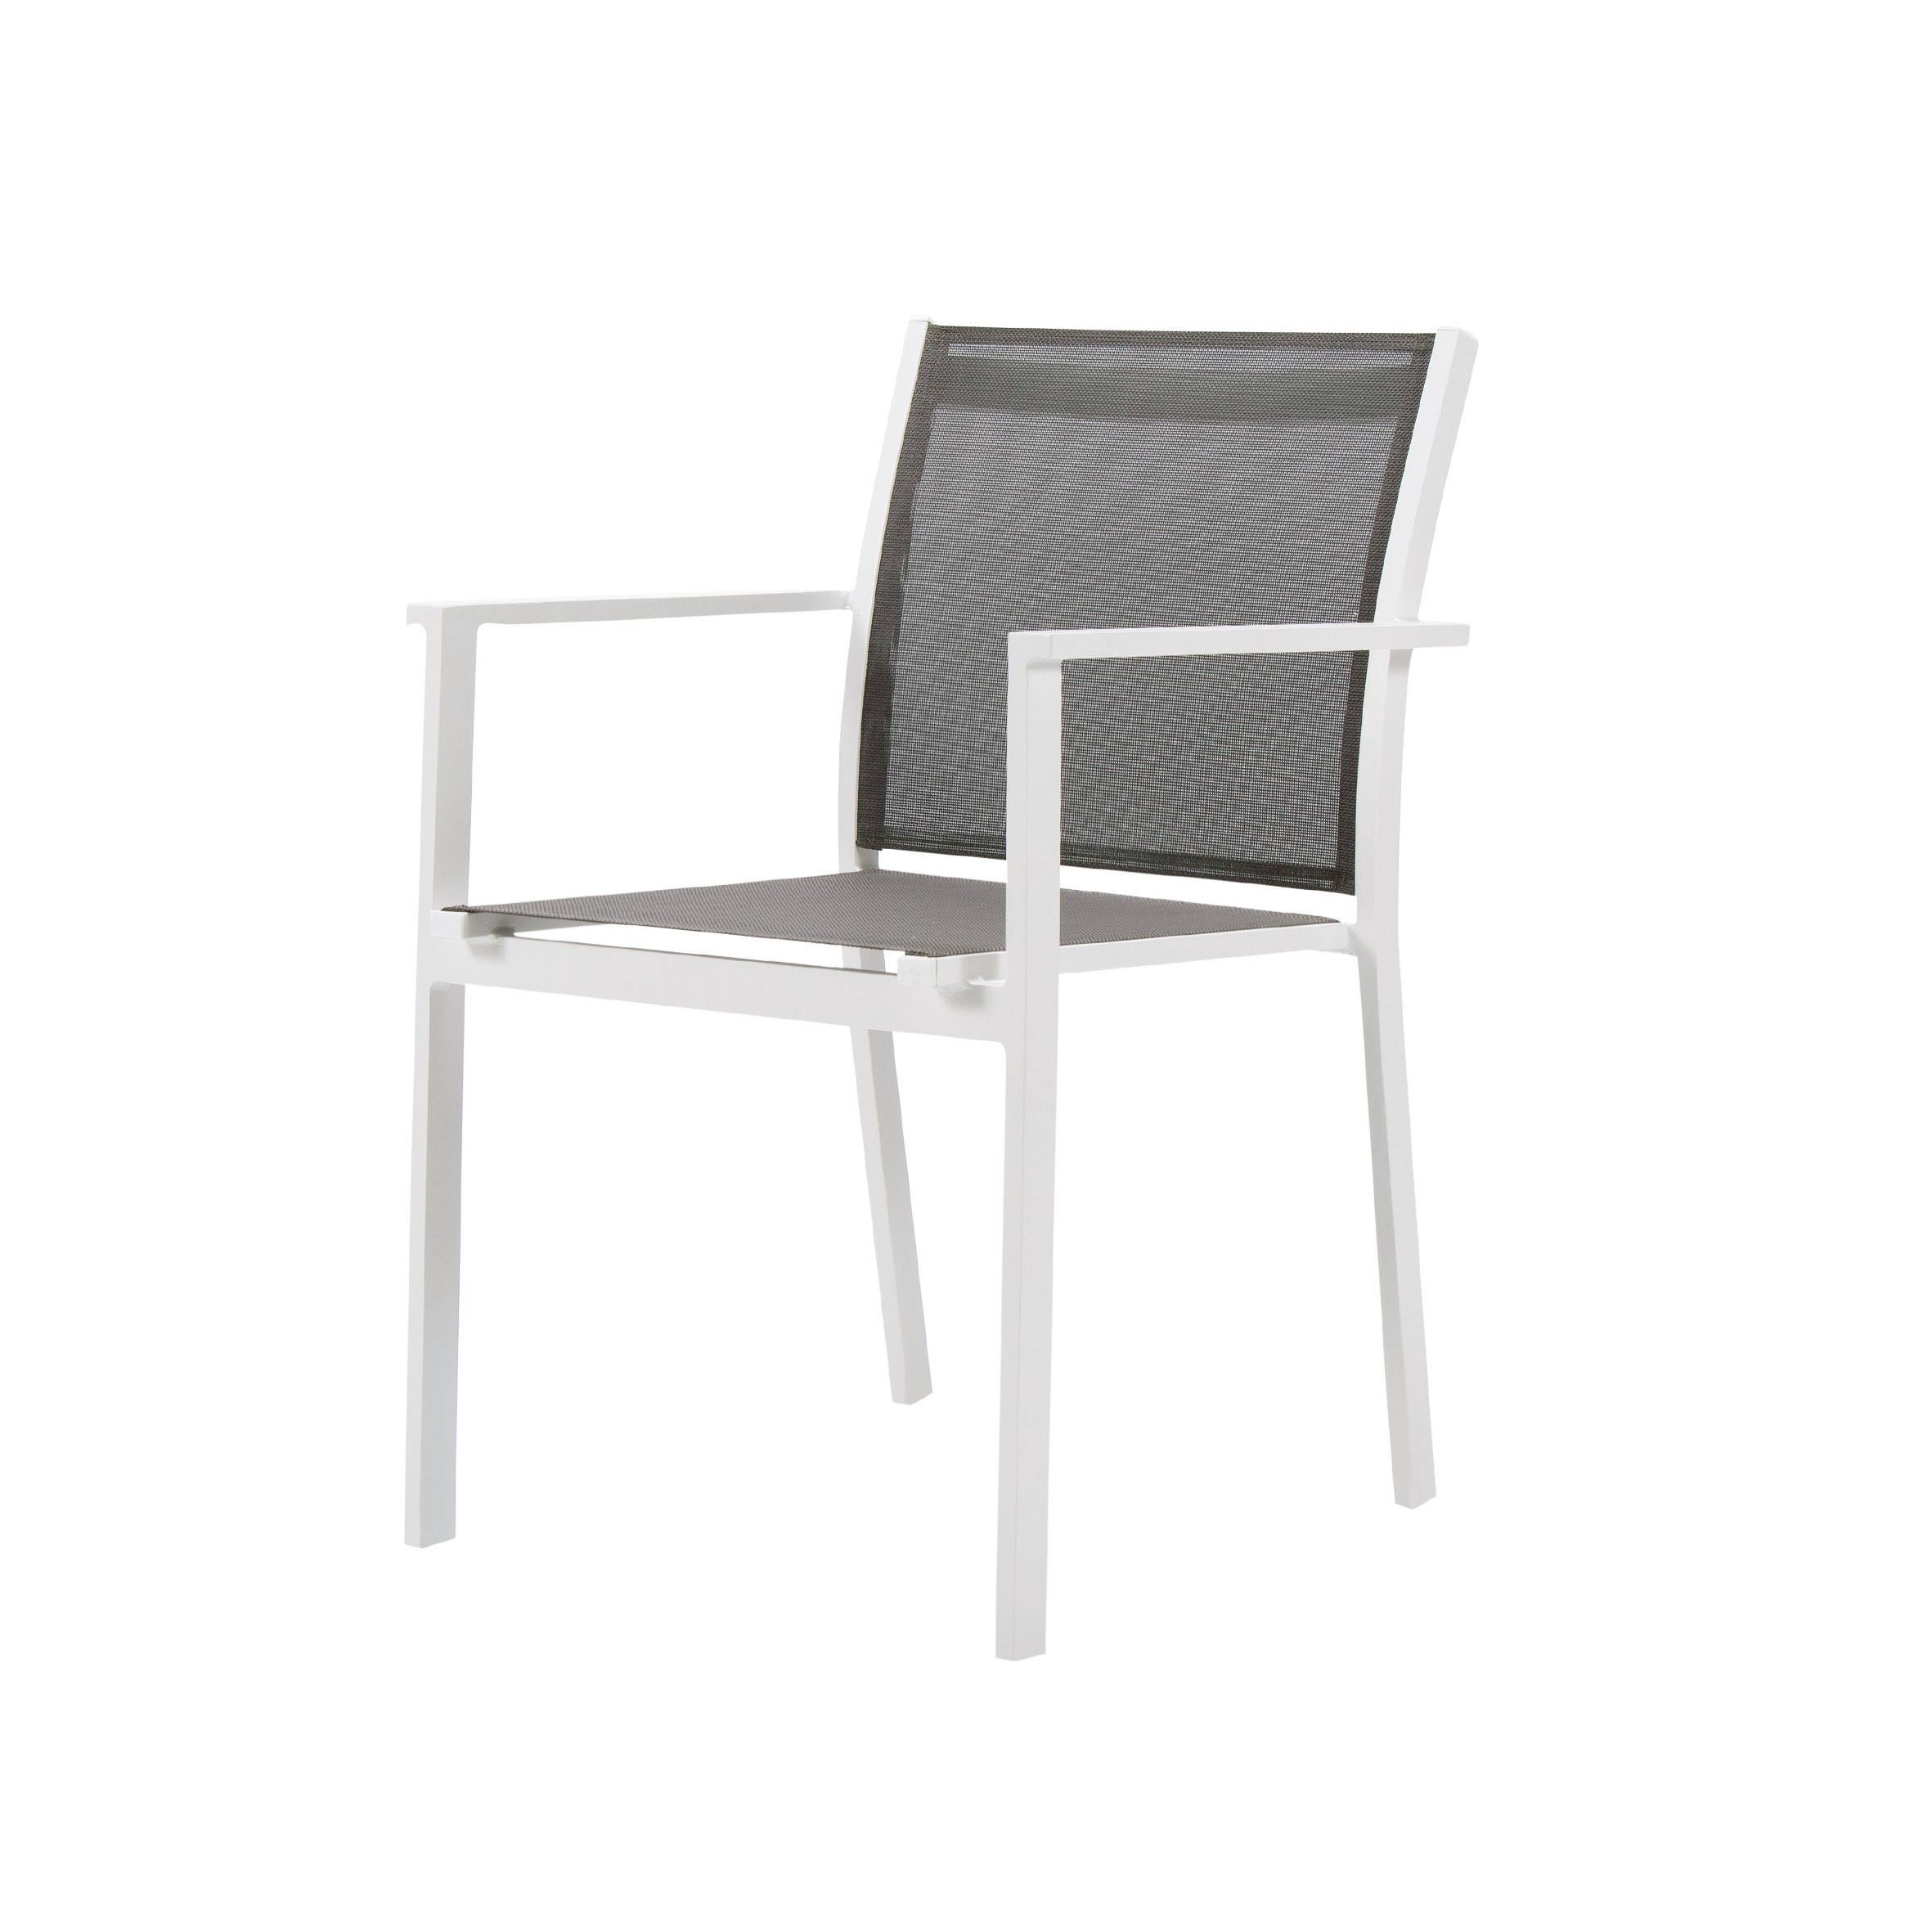 Kotka textilene dining chair Featured Image